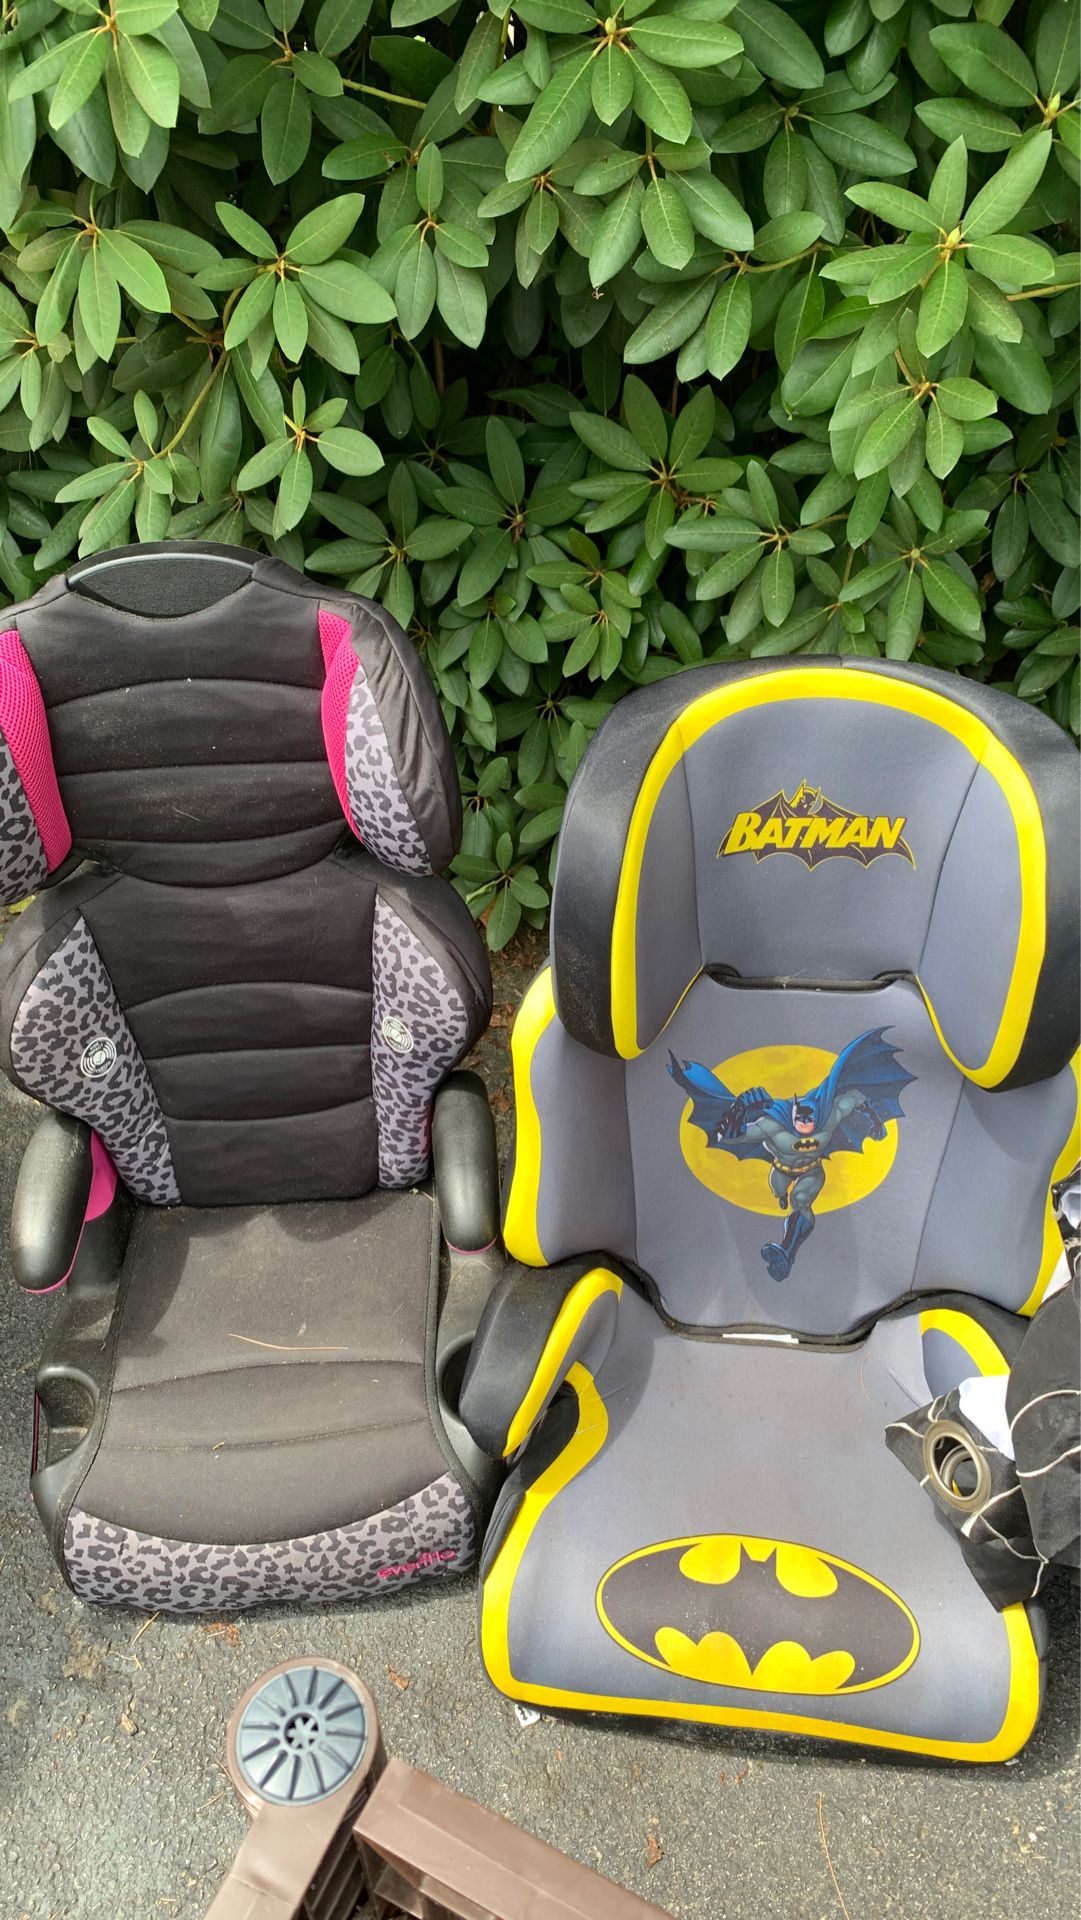 Two convertible change into booster seat car seats